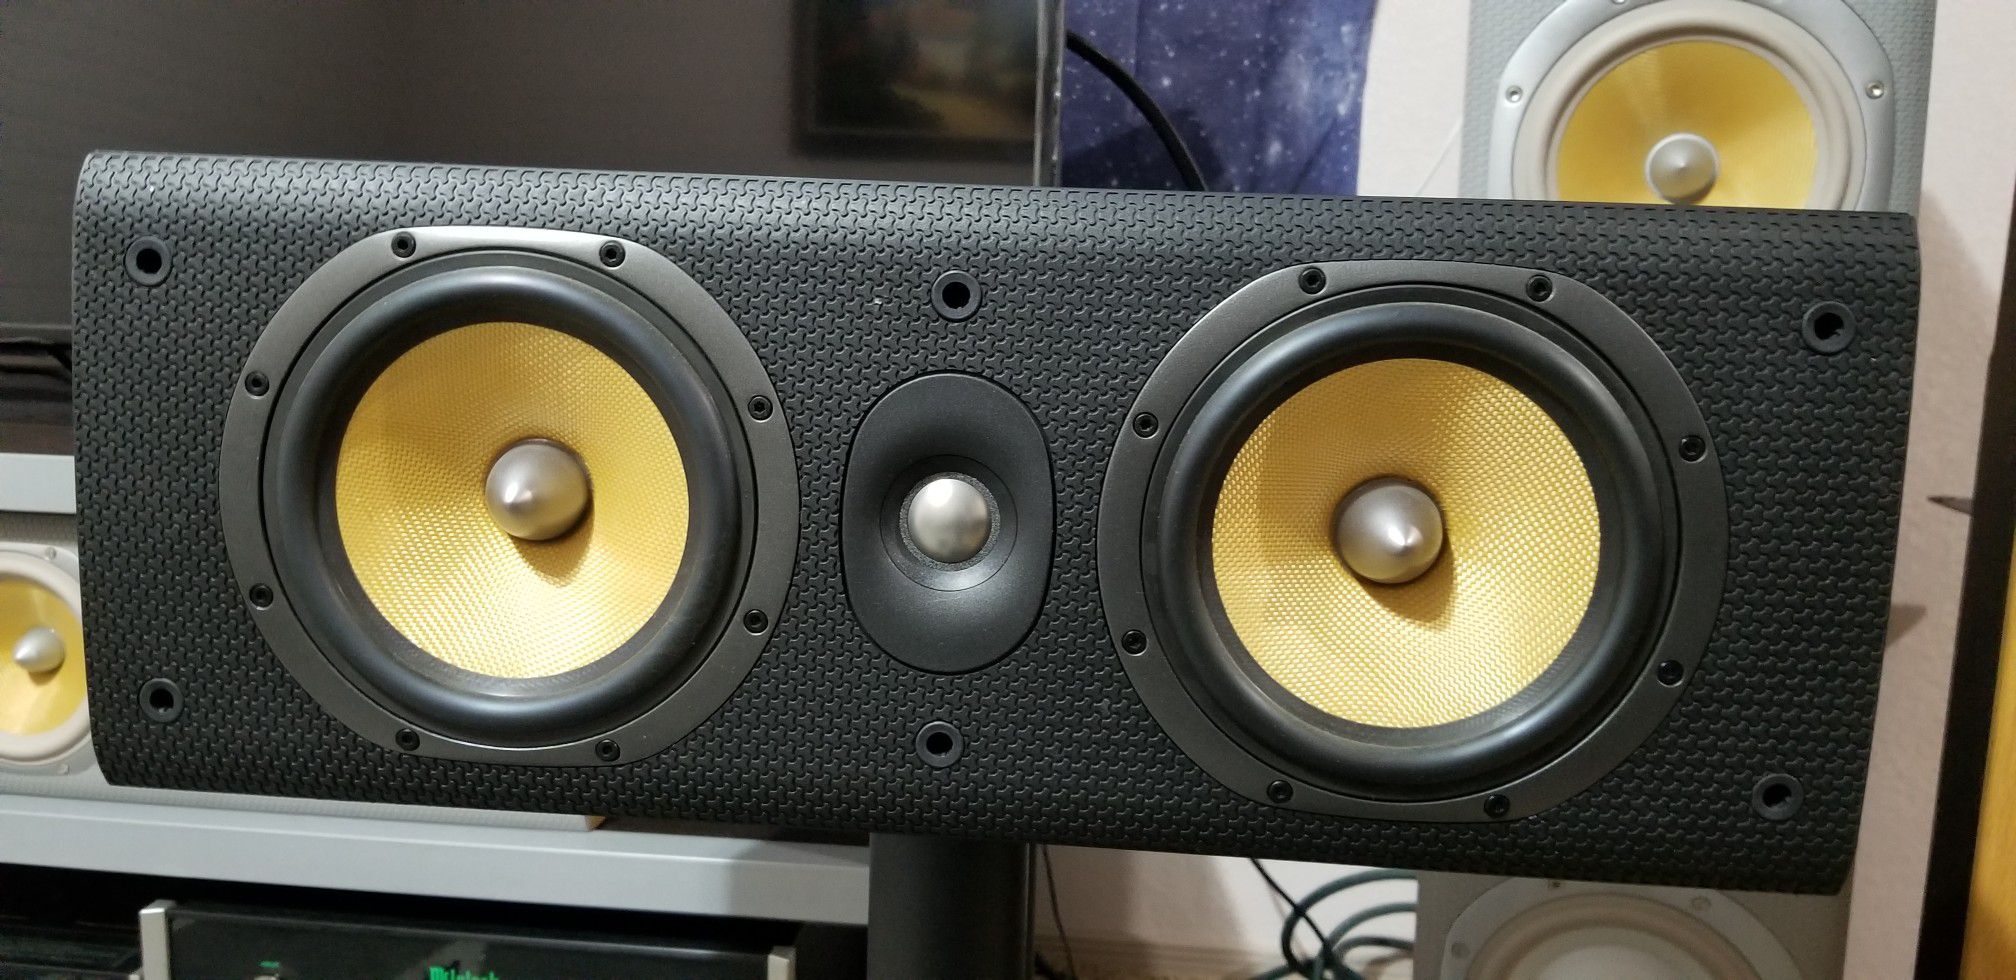 B&W (Bowers and Wilkins) LCR600 S3